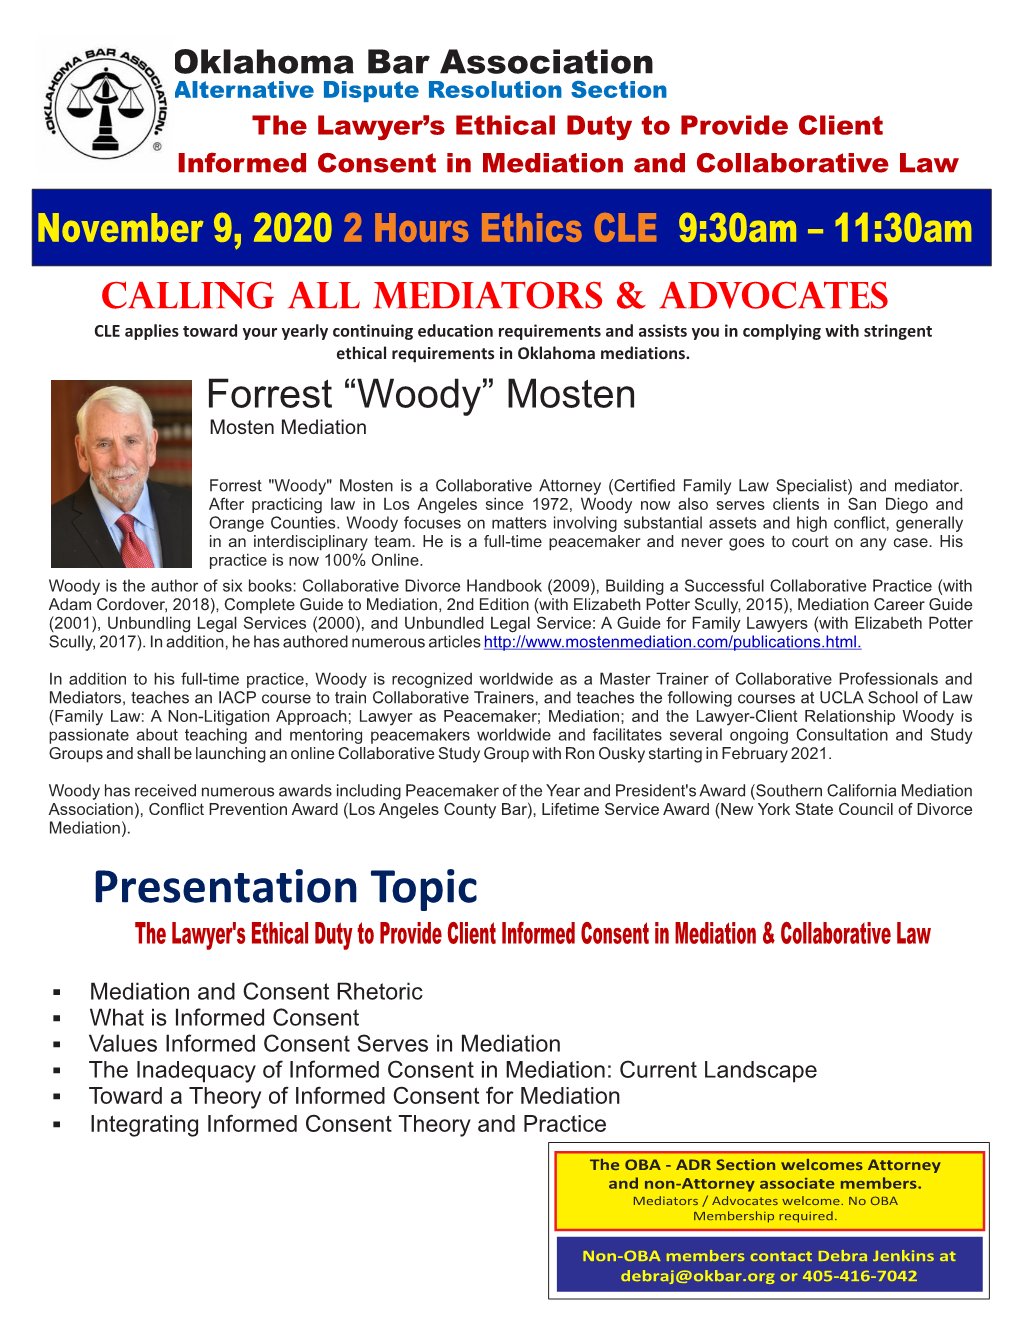 Presentation Topic the Lawyer's Ethical Duty to Provide Client Informed Consent in Mediation & Collaborative Law